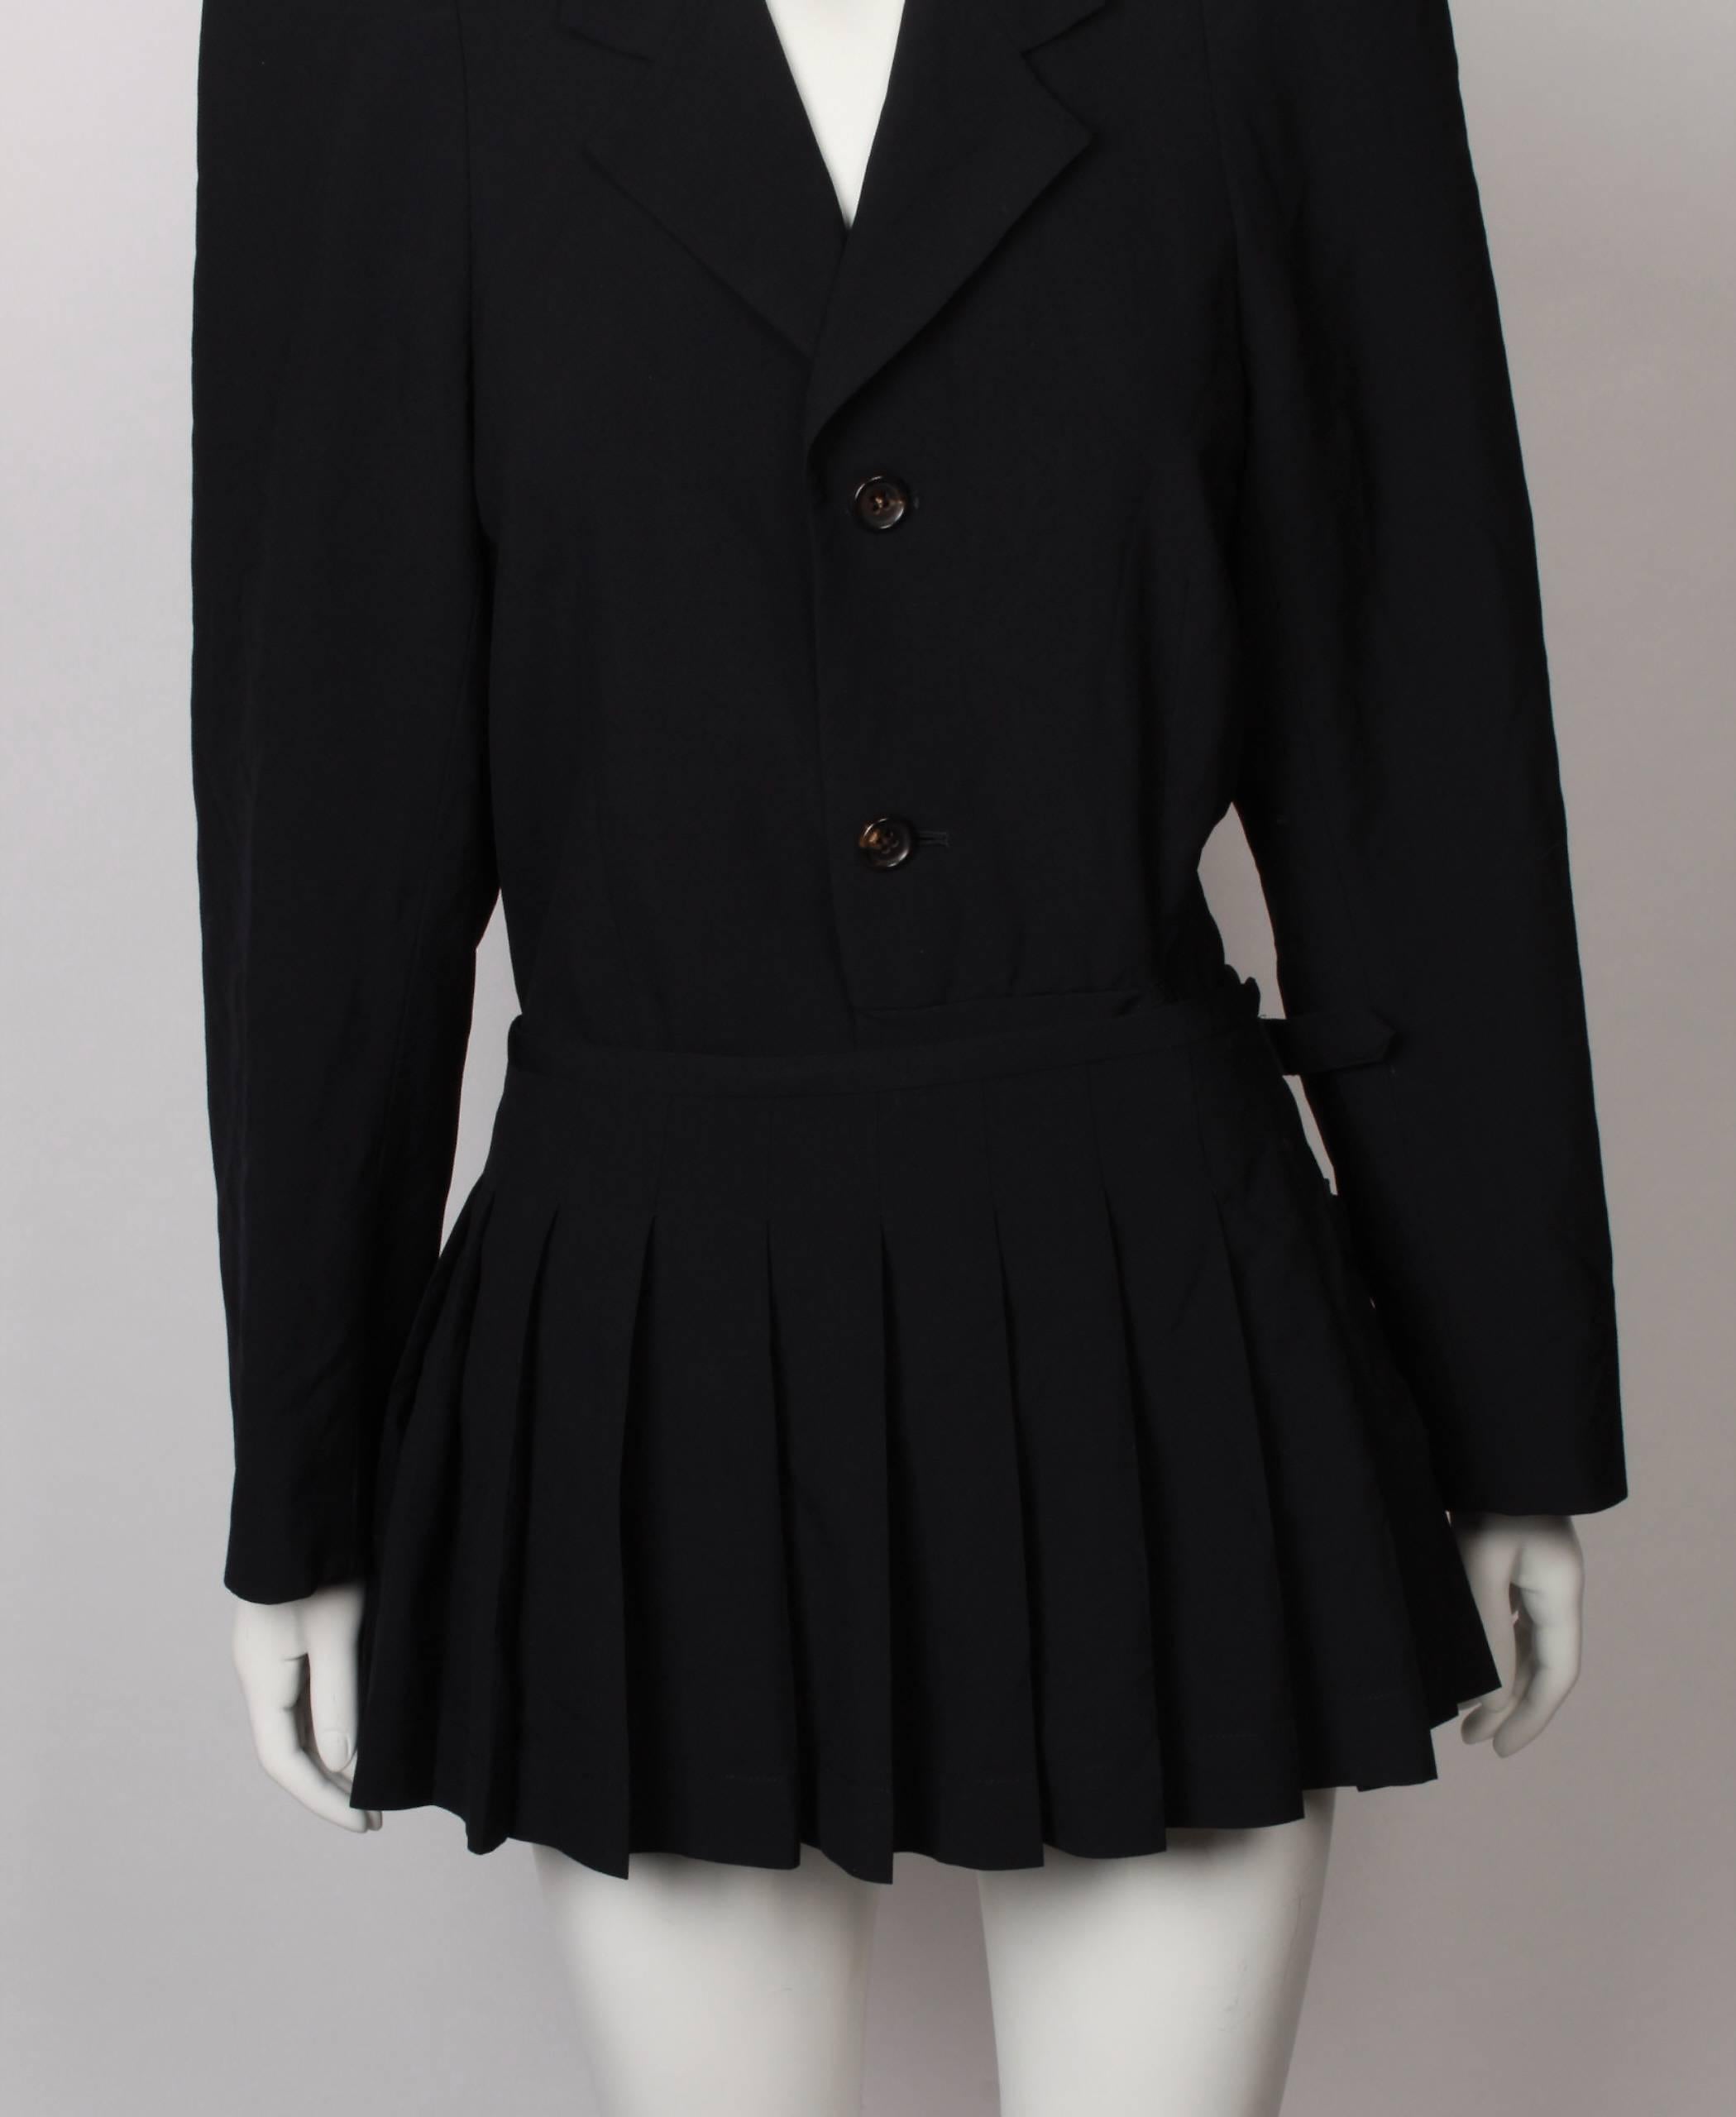 Comme des Garcons 1989 collection jacket with pointed shoulders and attached pleated kilt/skirt in black wool gaberdine. Dart in sleeve head creates peaked shape.
Can be worn many different ways. Iconic CDC.
Half lined with welt pockets with flap.